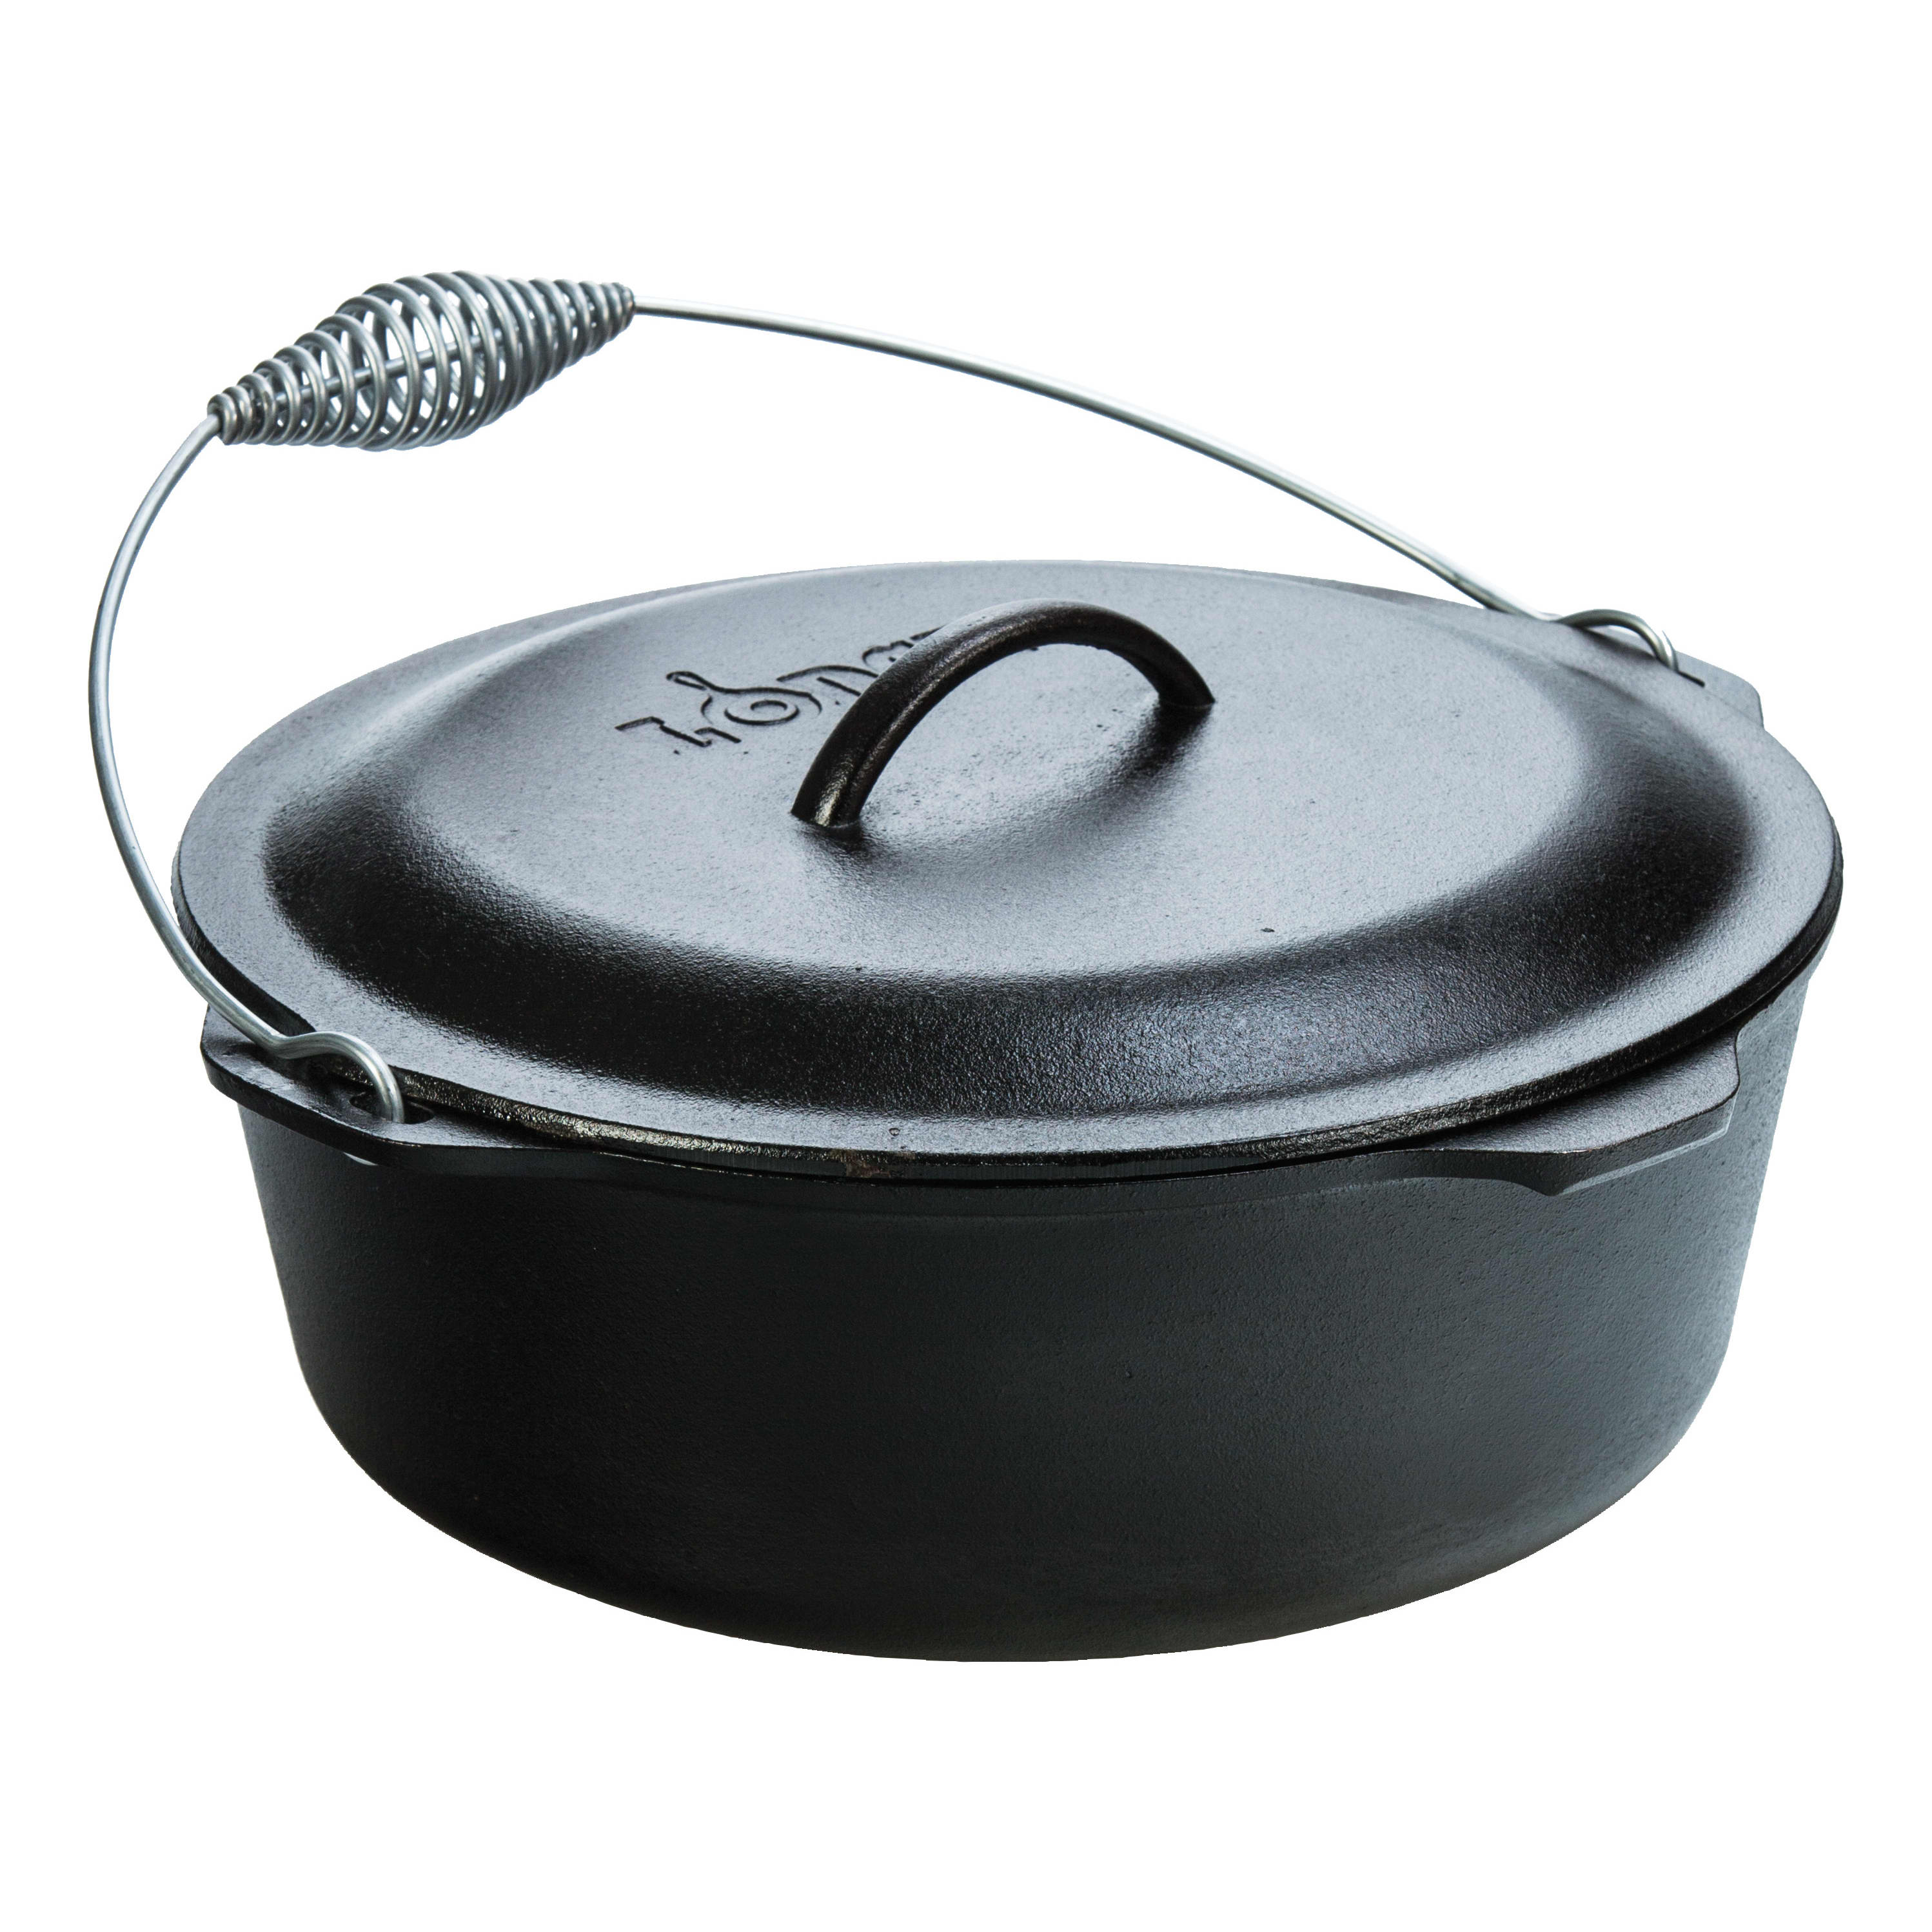 Camp Chef Dutch Oven 50 Tripod, Steel Chain for Hanging Cookware, TRIPOD50  